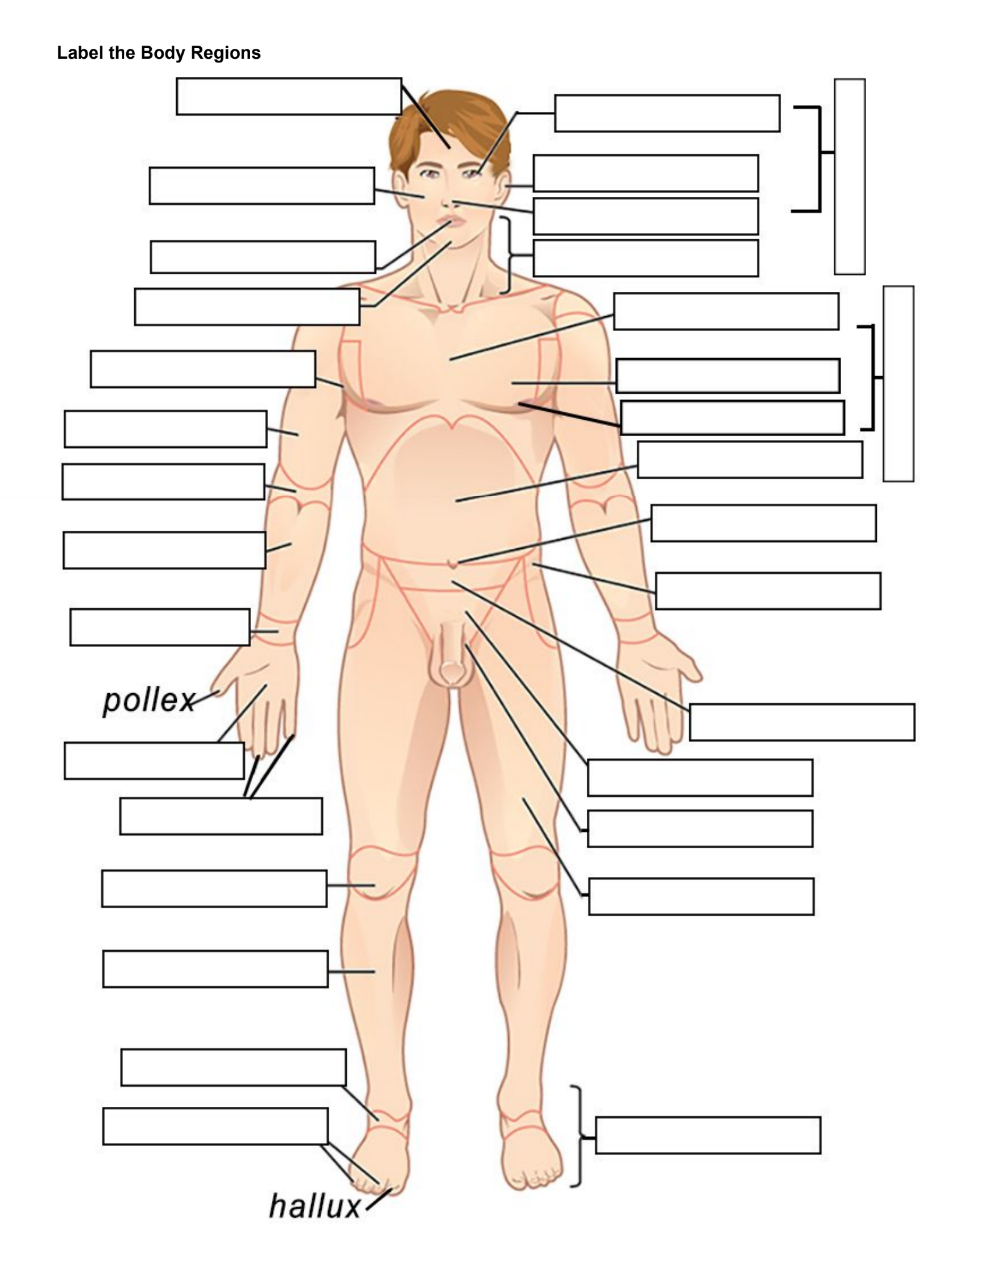 Body Regions Labeling 1.png